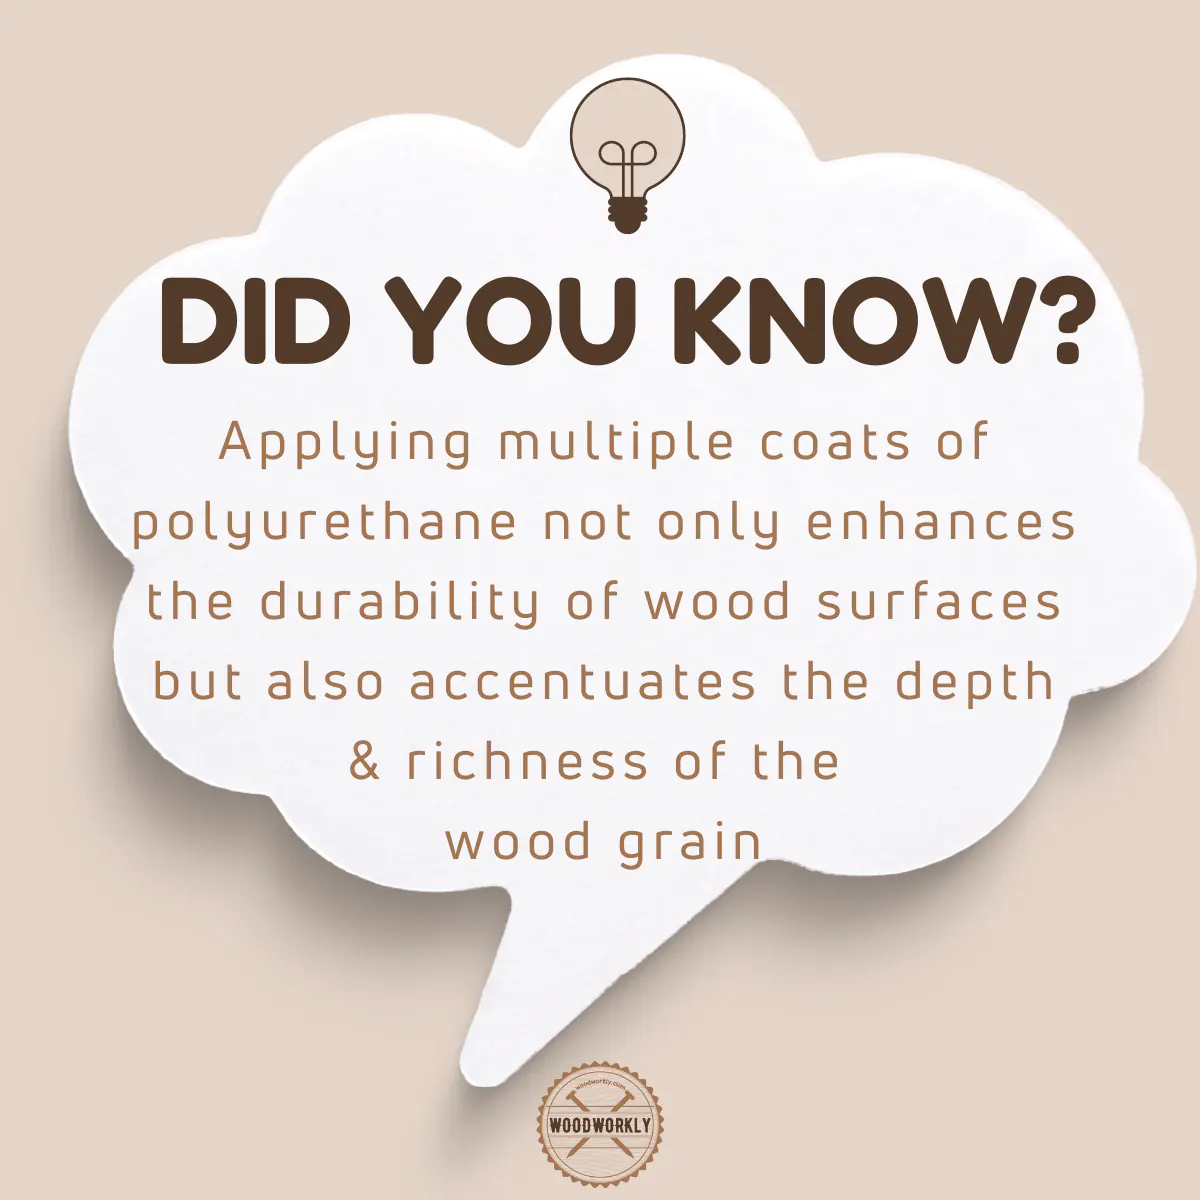 Did you know fact about polyurethane coats